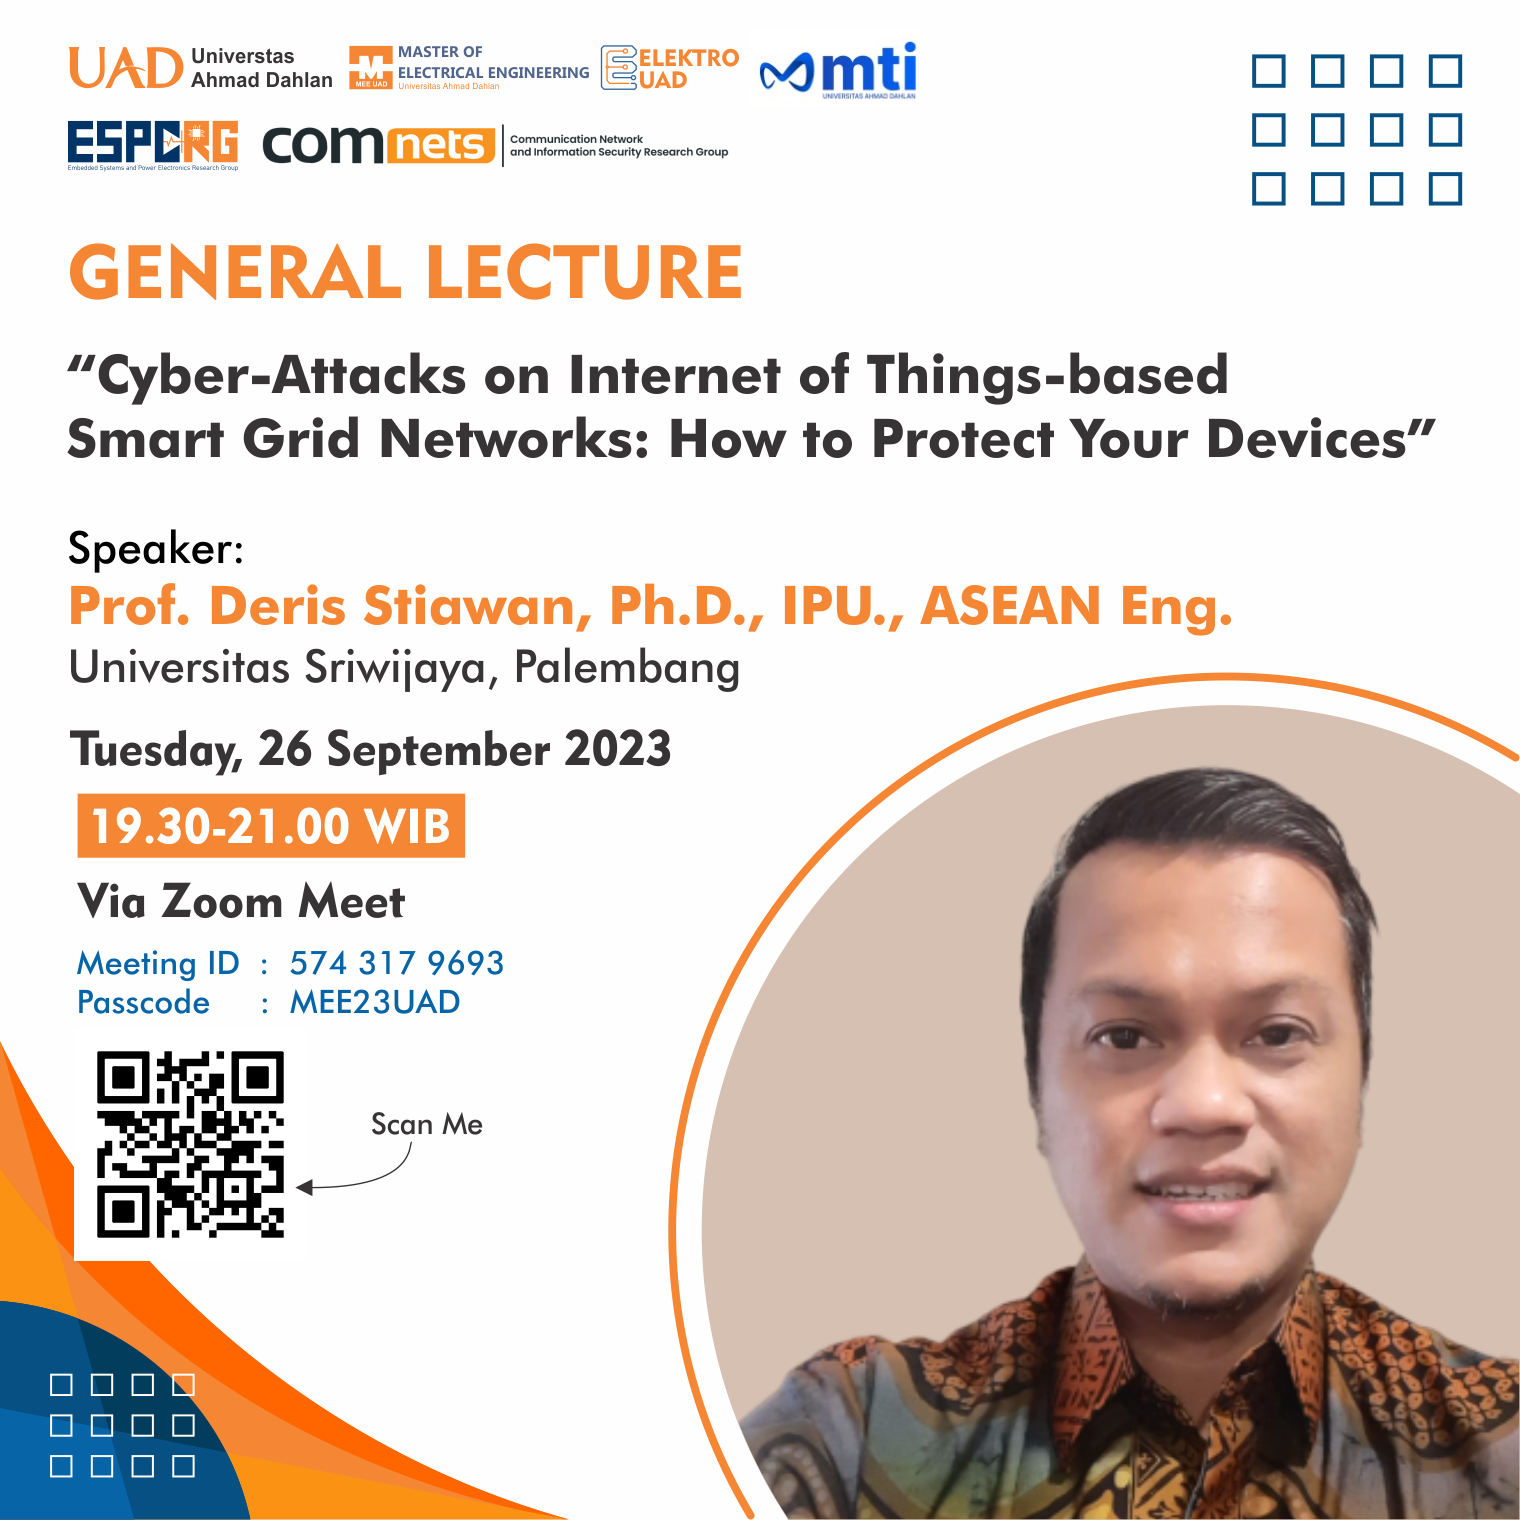 General Lecture “Cyber-Attacks on Internet of Things-based Smart Grid Networks: How to Protects Your Devices”